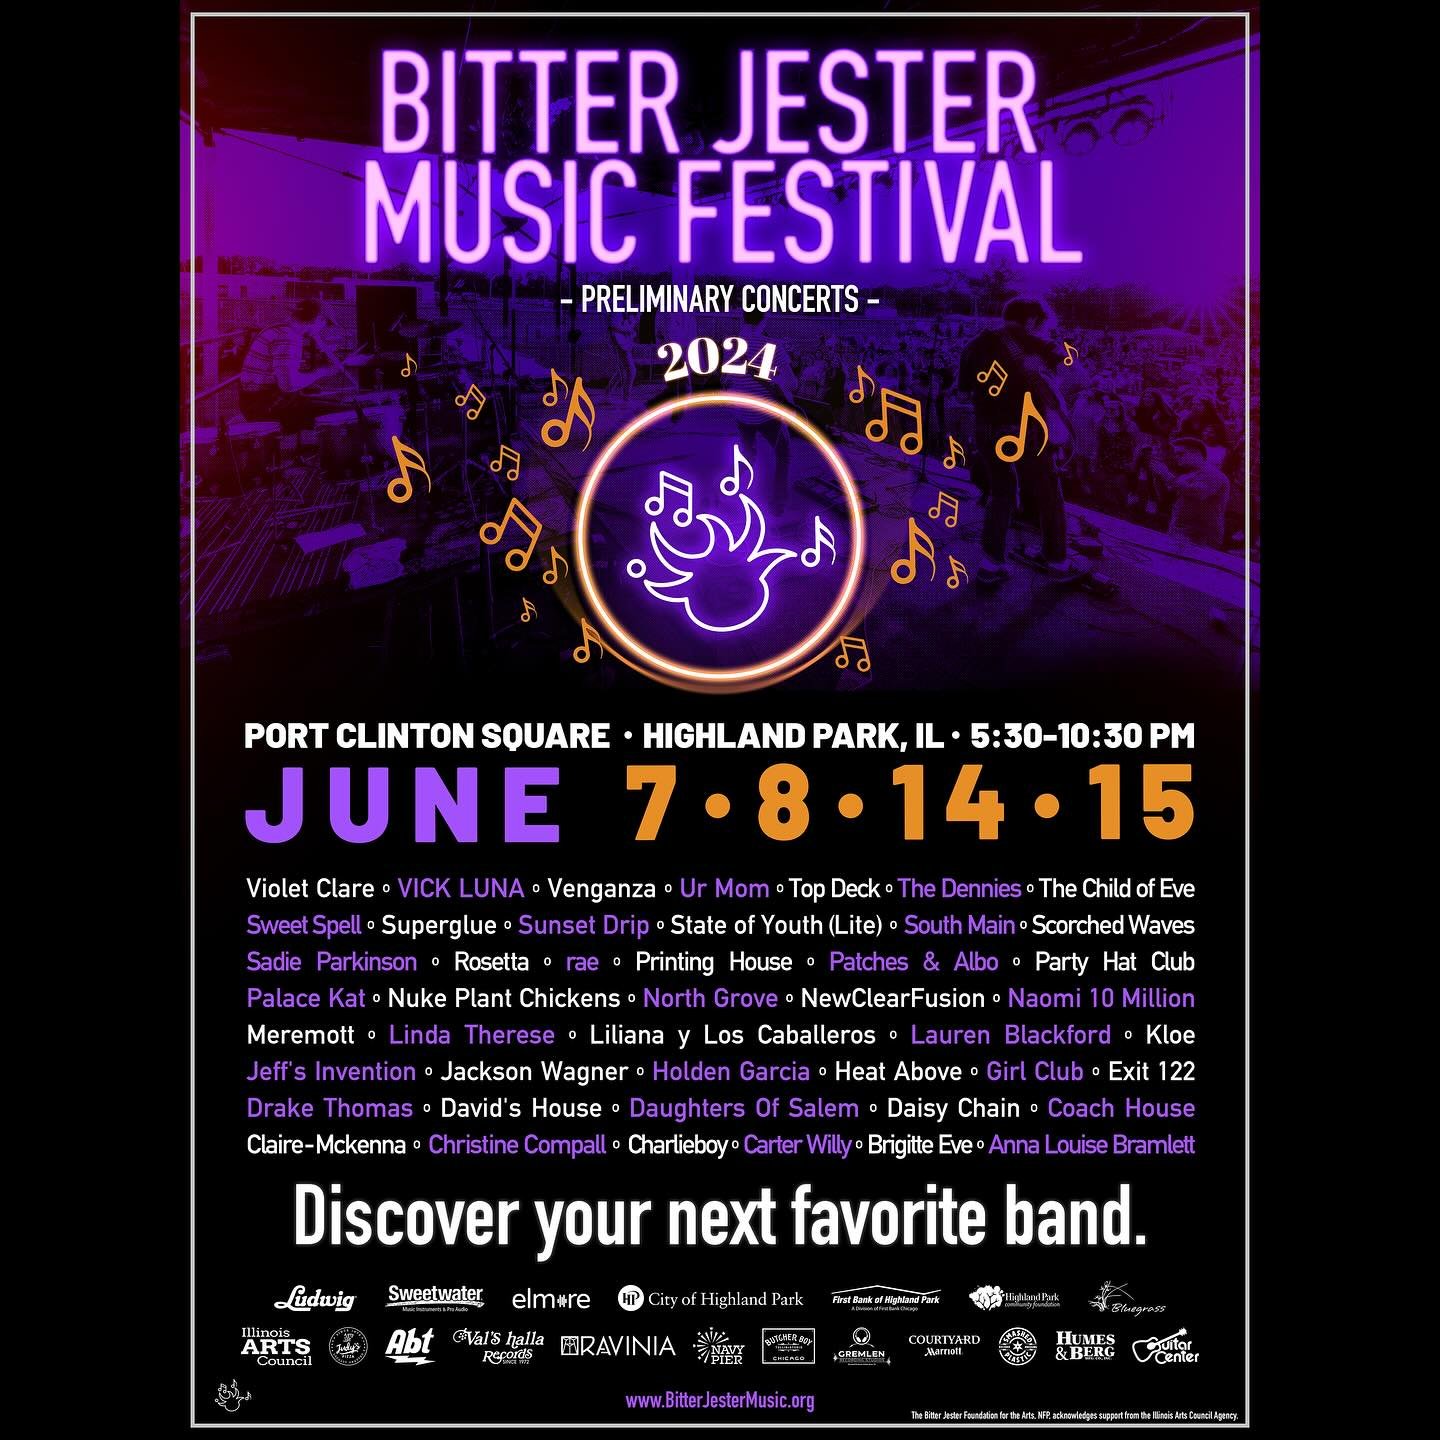 Bitter Jester Music Festival 2024 🎶 FULL LINEUP ANNOUNCED! 🎶 See you in June in Highland Park! More info in our bio link ⬆️ Discover your next favorite band at Bitter Jester!

BJMF is financially supported by @enjoyhighlandpark @firstbankhp @judysp